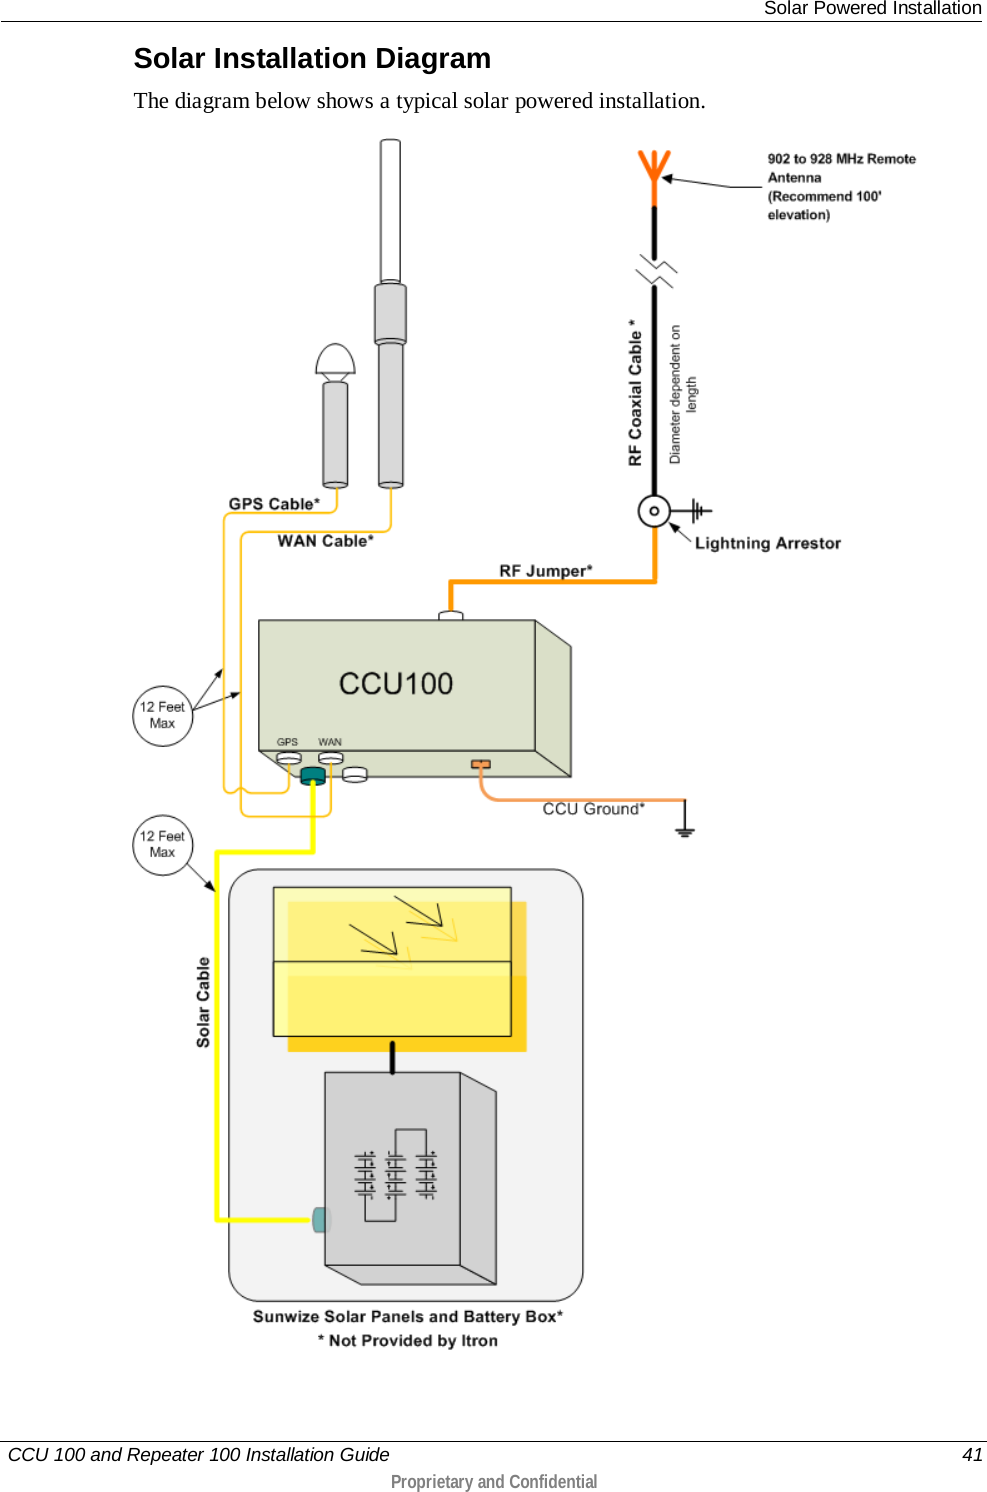  Solar Powered Installation   CCU 100 and Repeater 100 Installation Guide    41  Proprietary and Confidential  Solar Installation Diagram The diagram below shows a typical solar powered installation.    